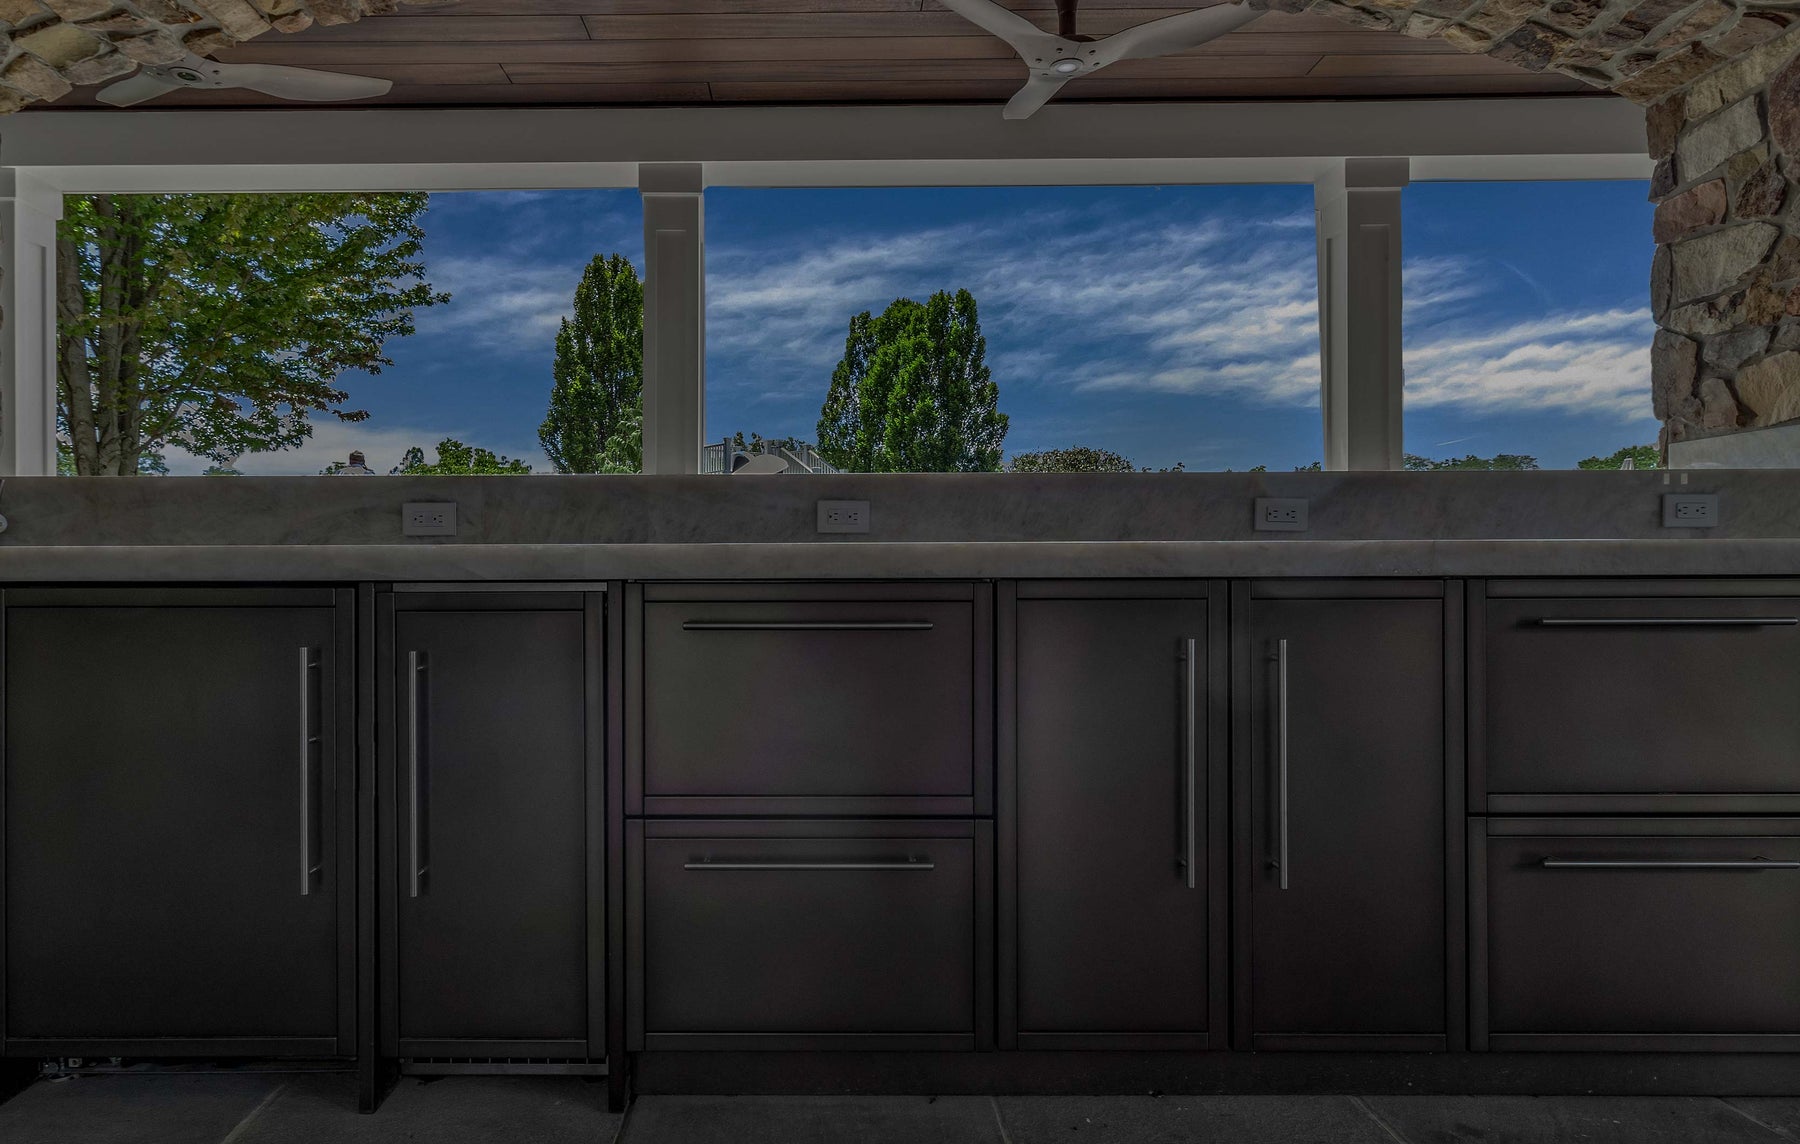 John Michael Luxury Outdoor Kitchens, Stainless steel, powder coated, world class, custom outdoor kitchens, custom vent hoods, outdoor kitchen design, outdoor kitchen remodel, outdoor kitchen renovation, outdoor designer kitchen, new outdoor kitchen, foodie, celebrity kitchen